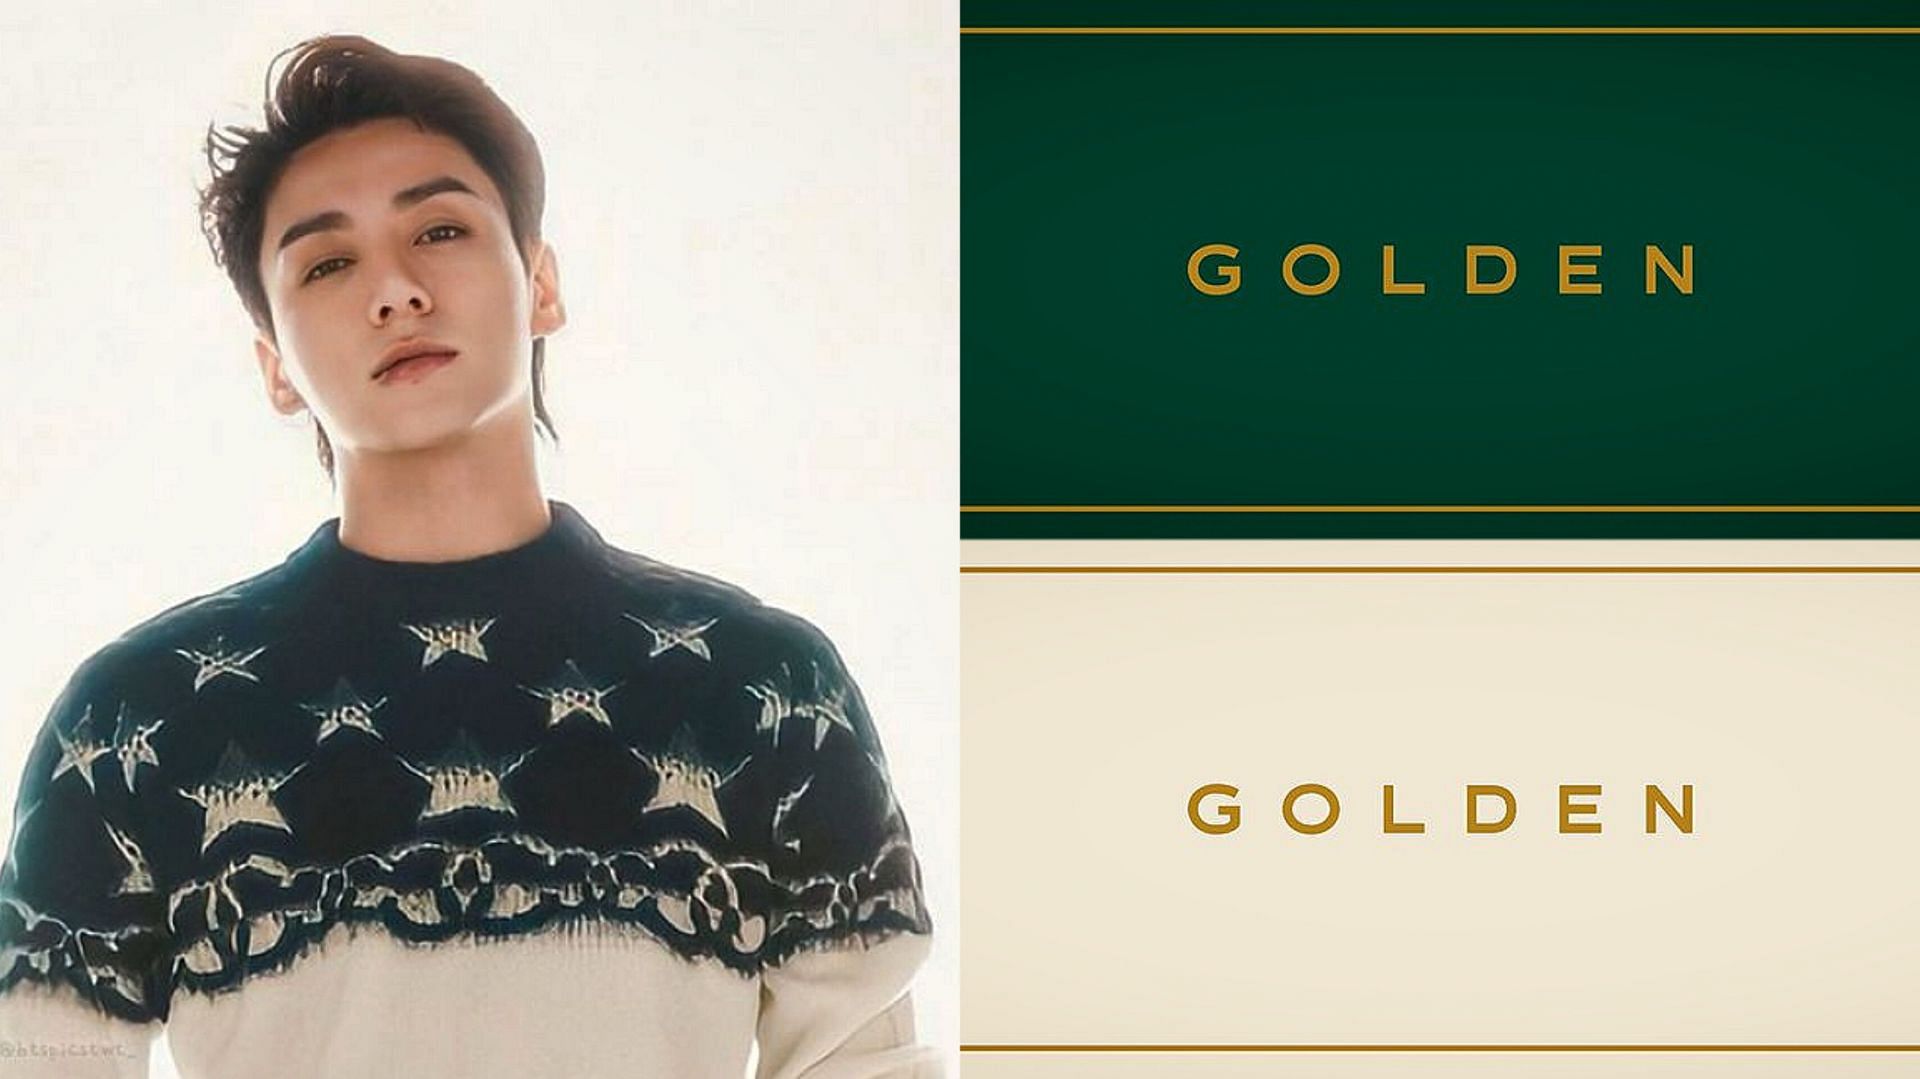 BTS' Jungkook to release first solo album 'GOLDEN' in November